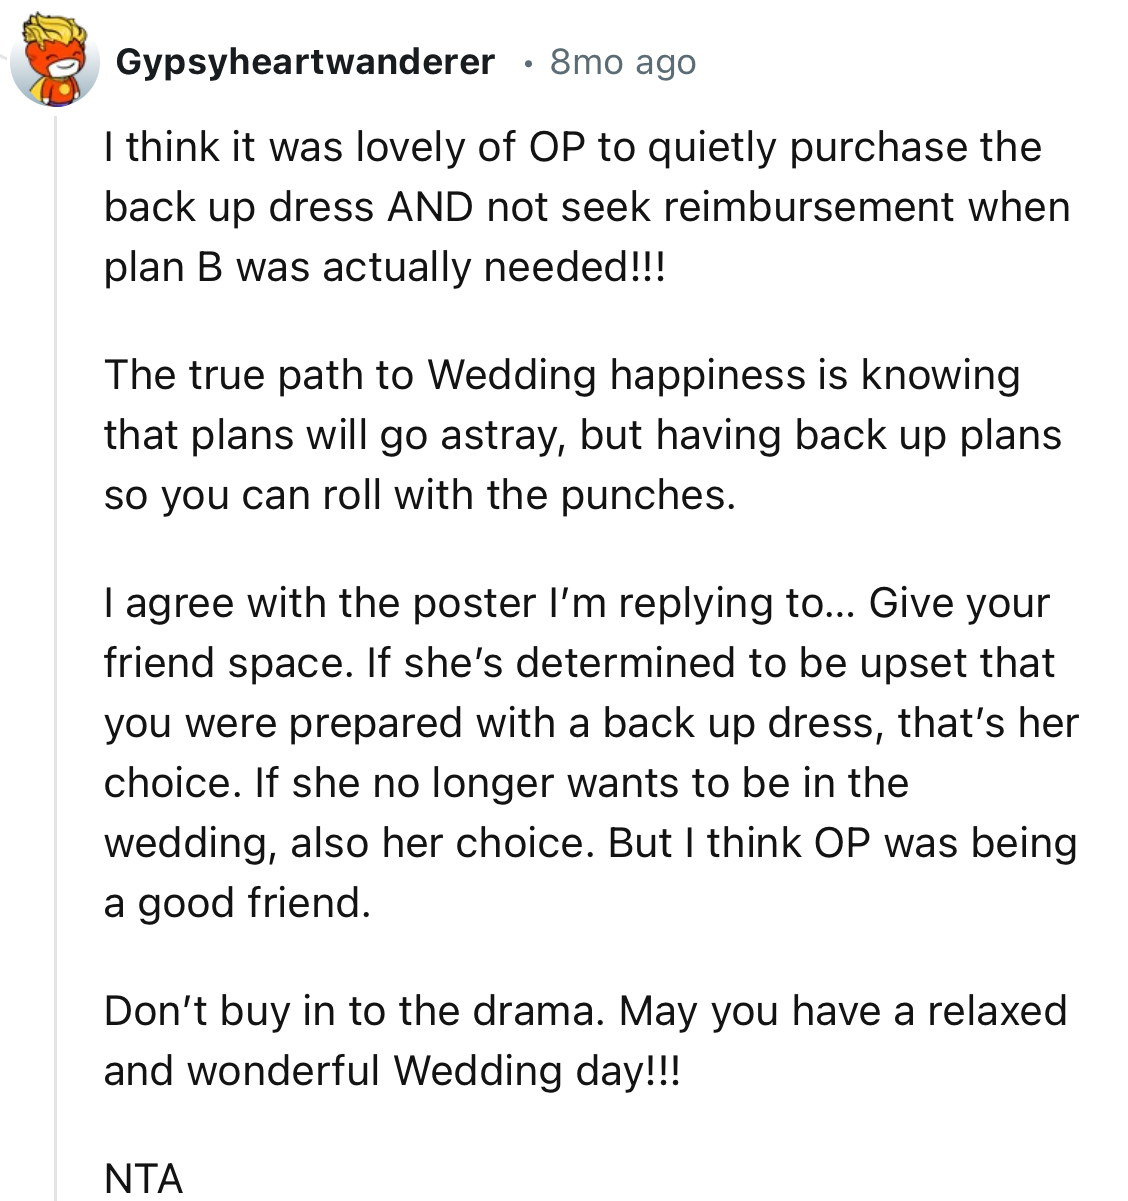 “I think OP was being a good friend. Don’t buy into the drama.“